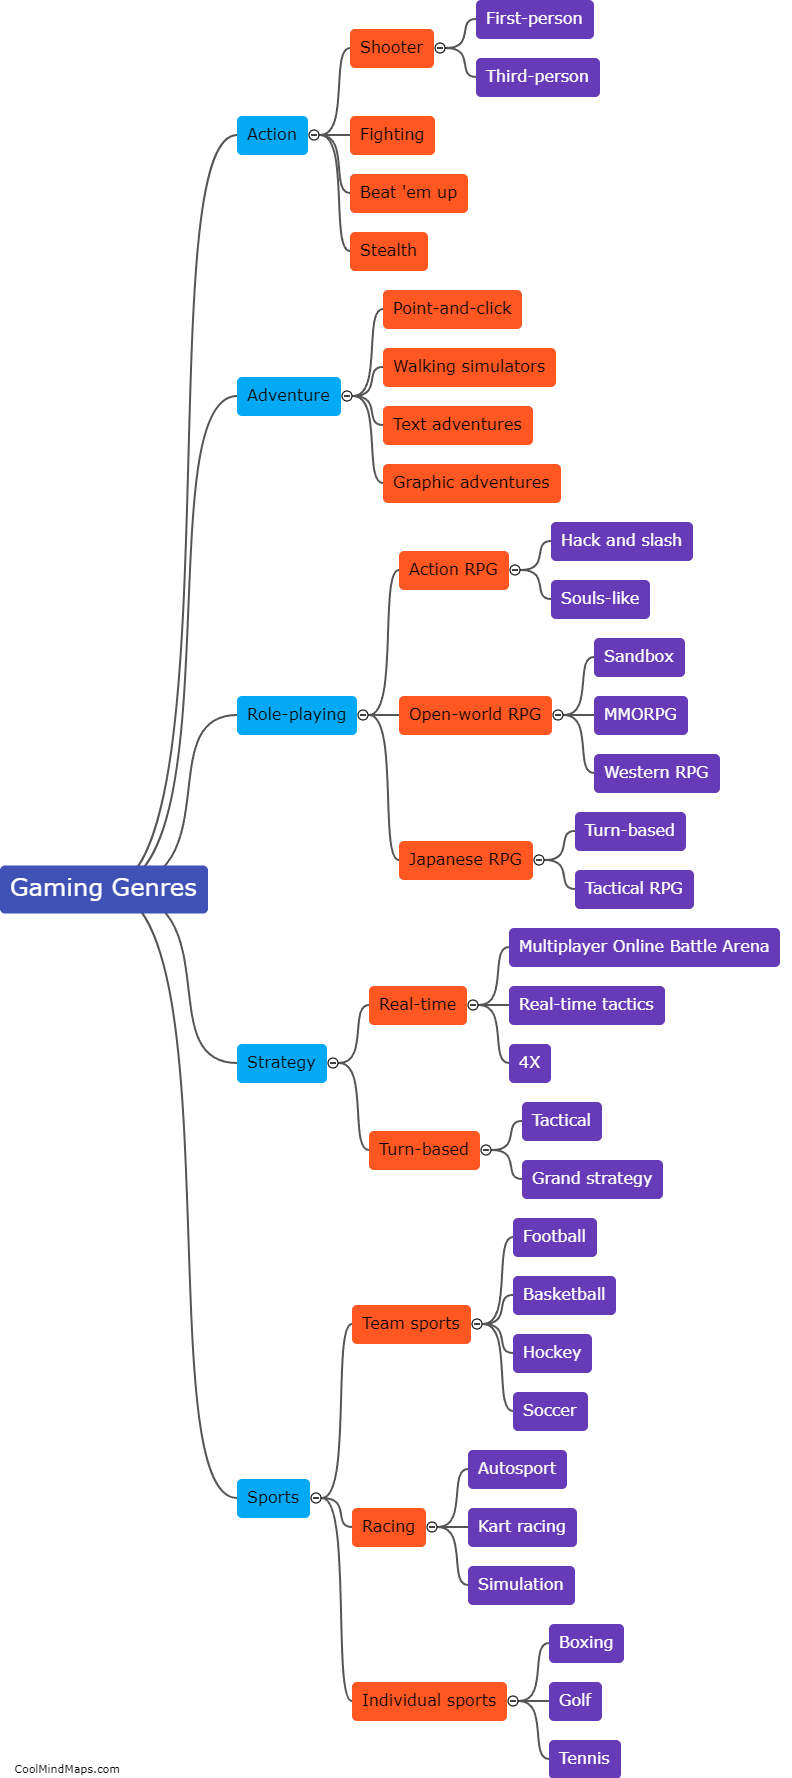 What are the most popular gaming genres?